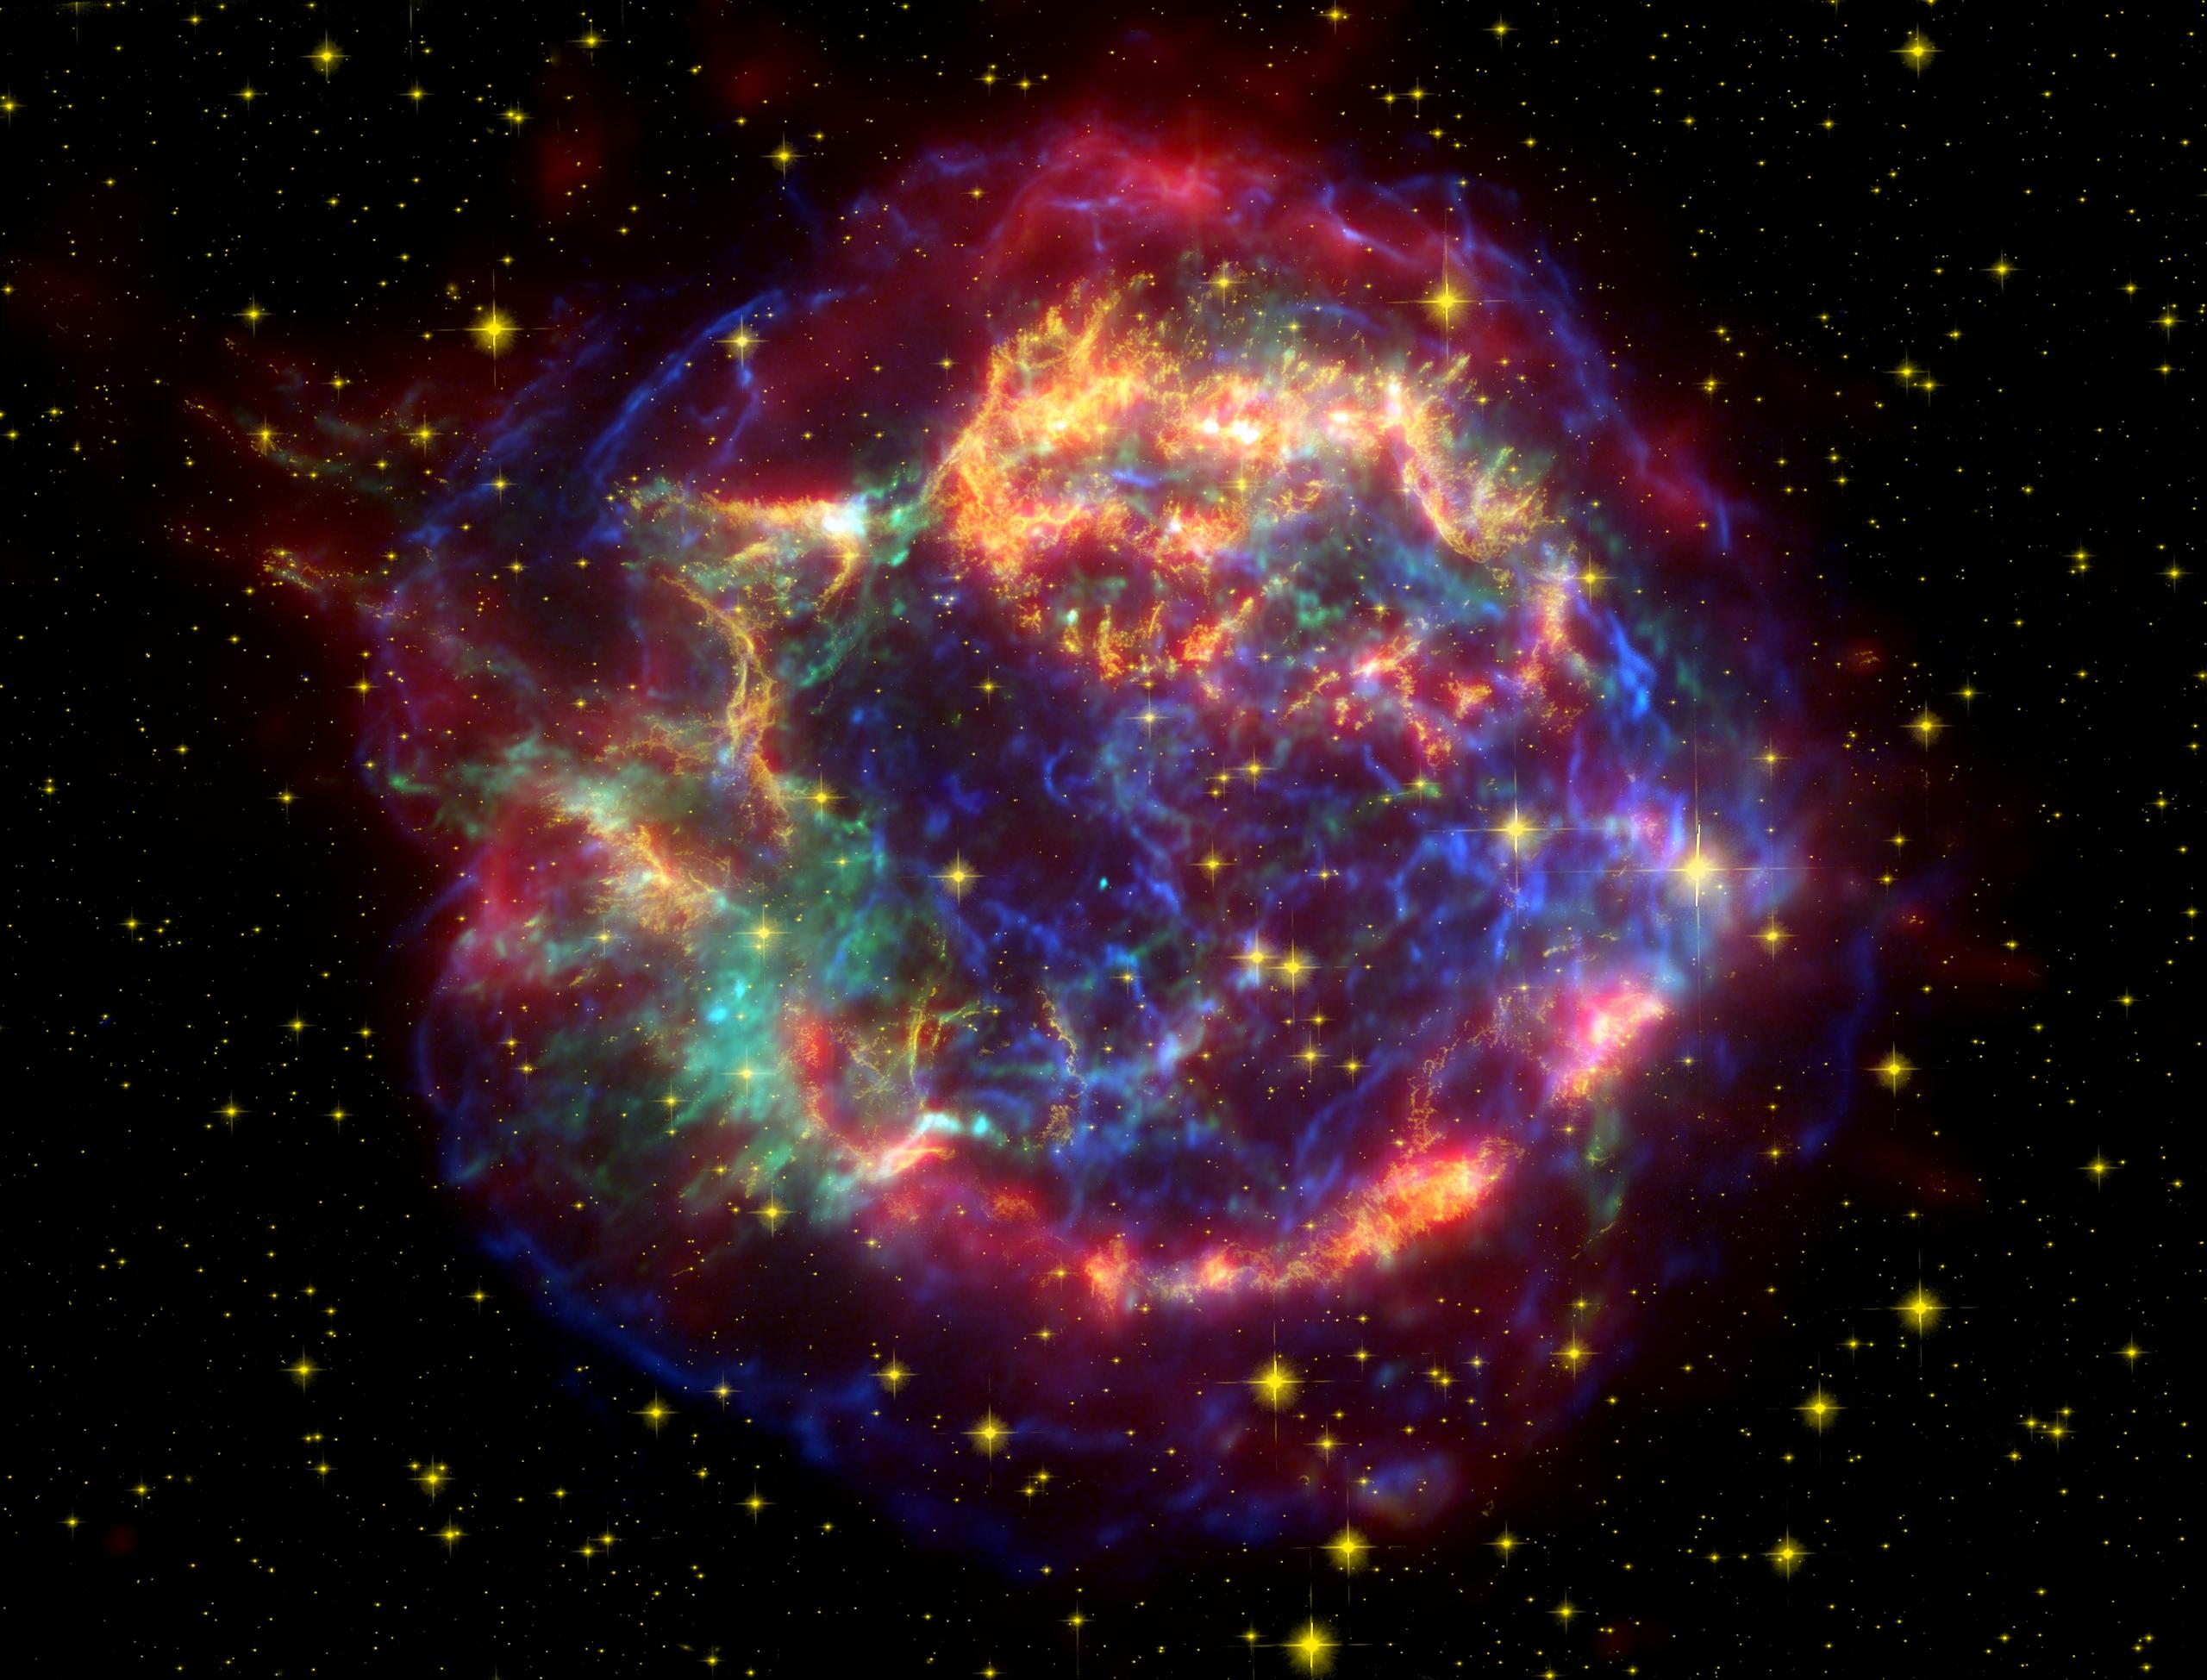 A false colour image of Cassiopeia A creating using data from the Spitzer and Hubble Space Telescopes and the Chandra X-Ray observatory.